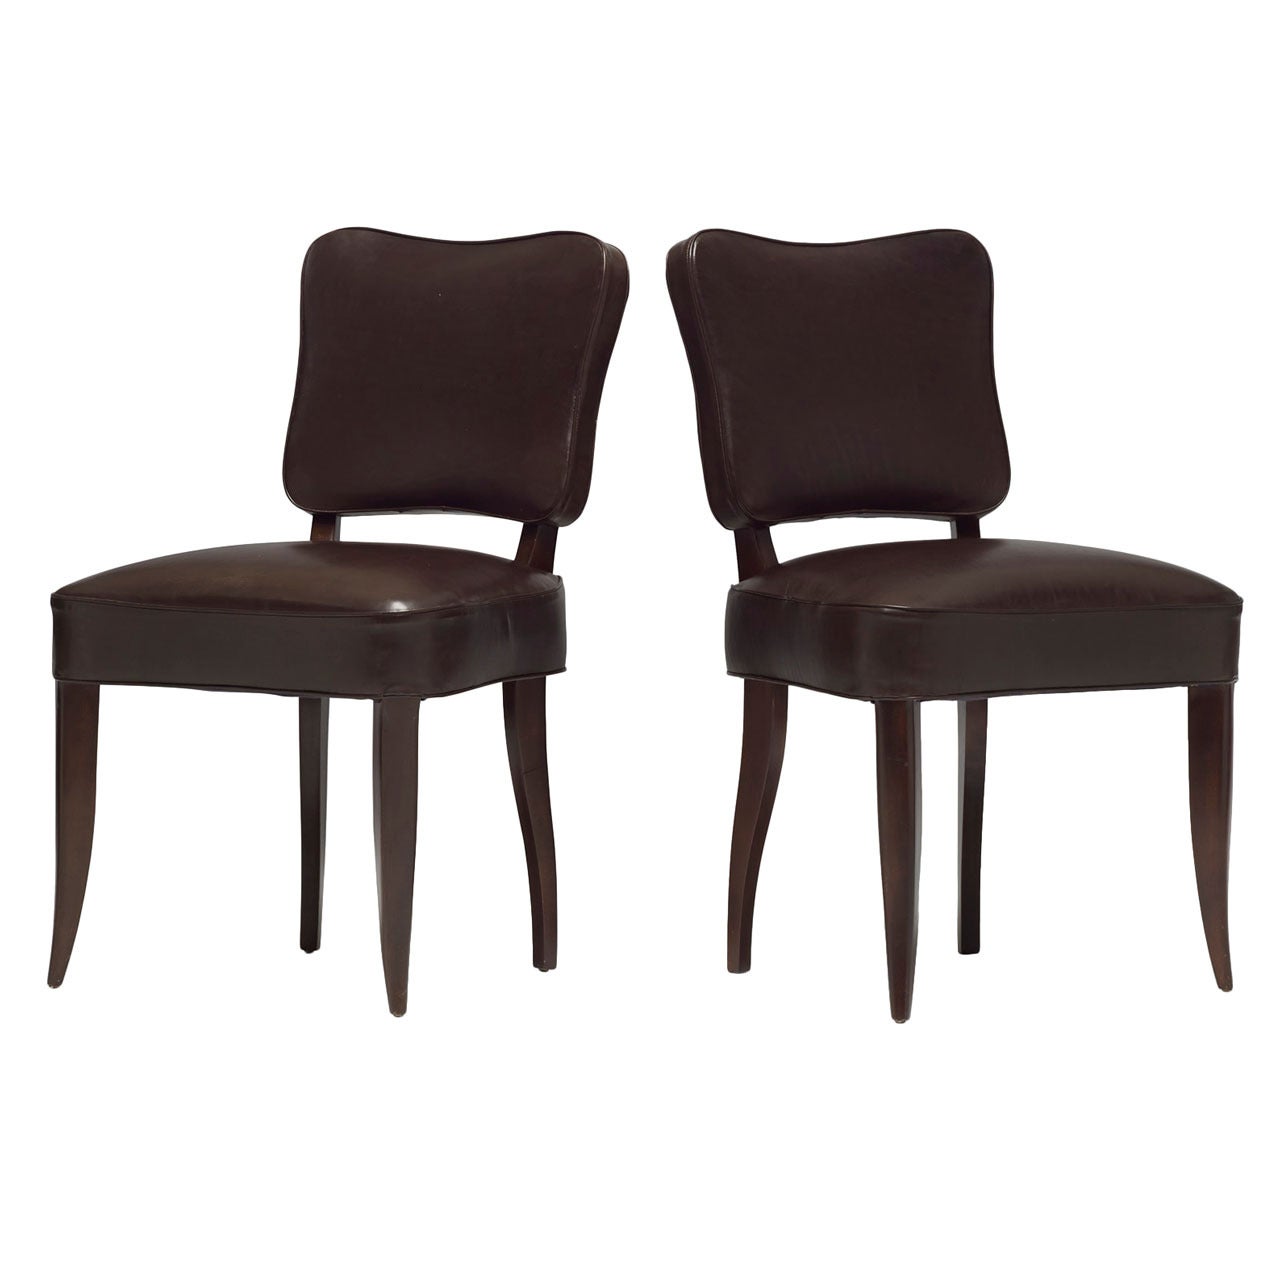 Trefle Chairs, Pair By Jean Royère